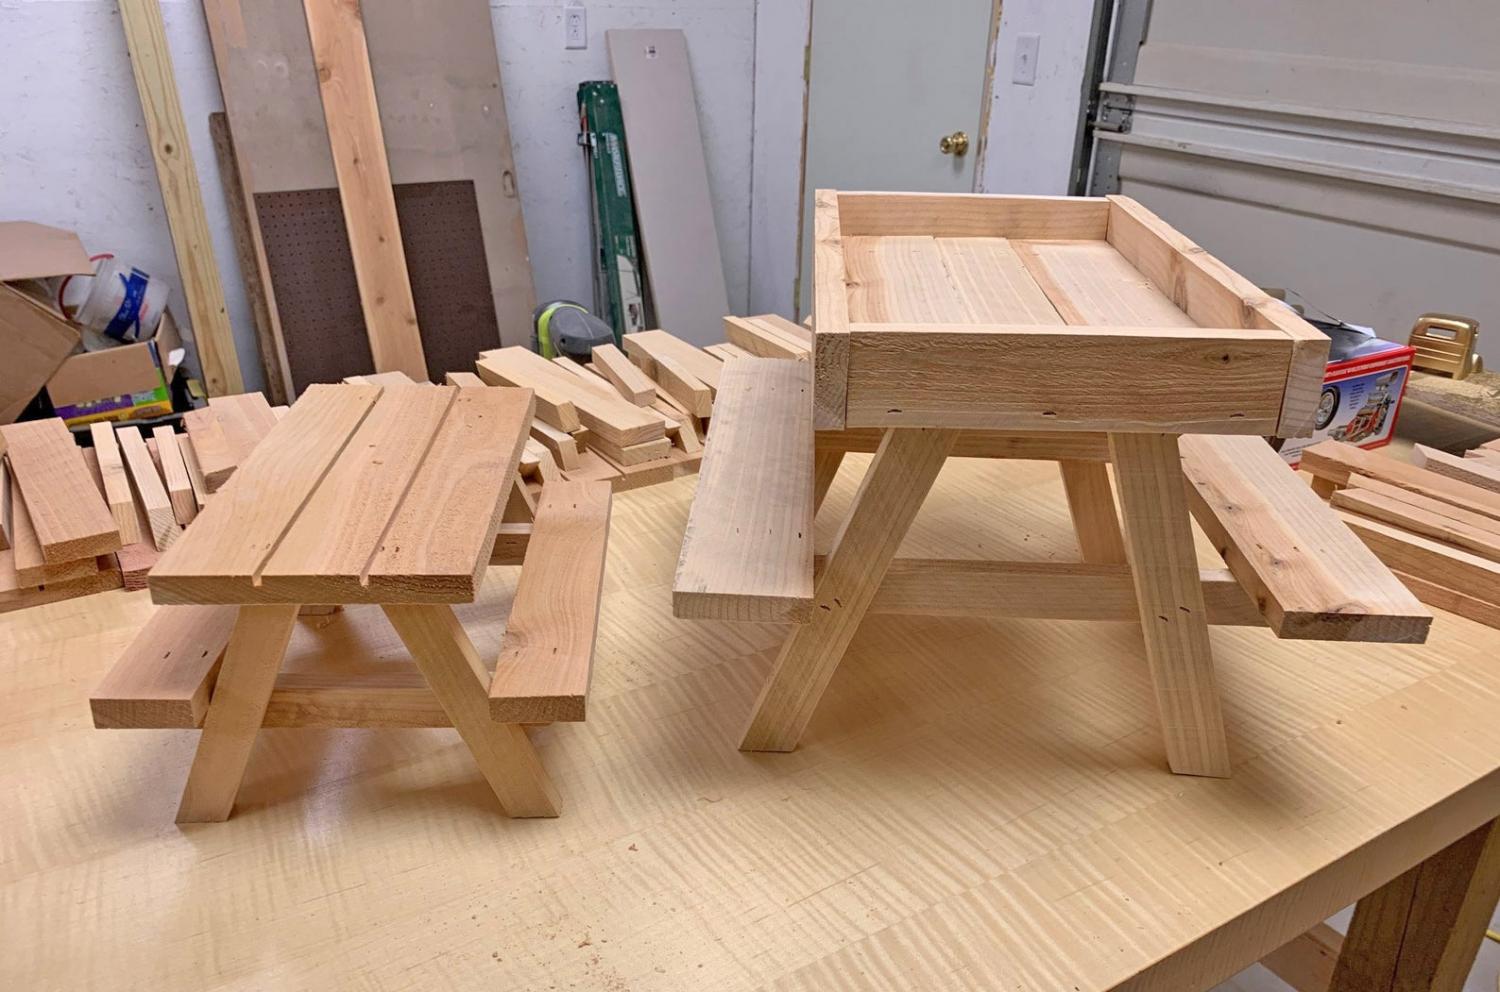 Mini Picnic Table For Chickens - Chicknic table - chicken picnic table